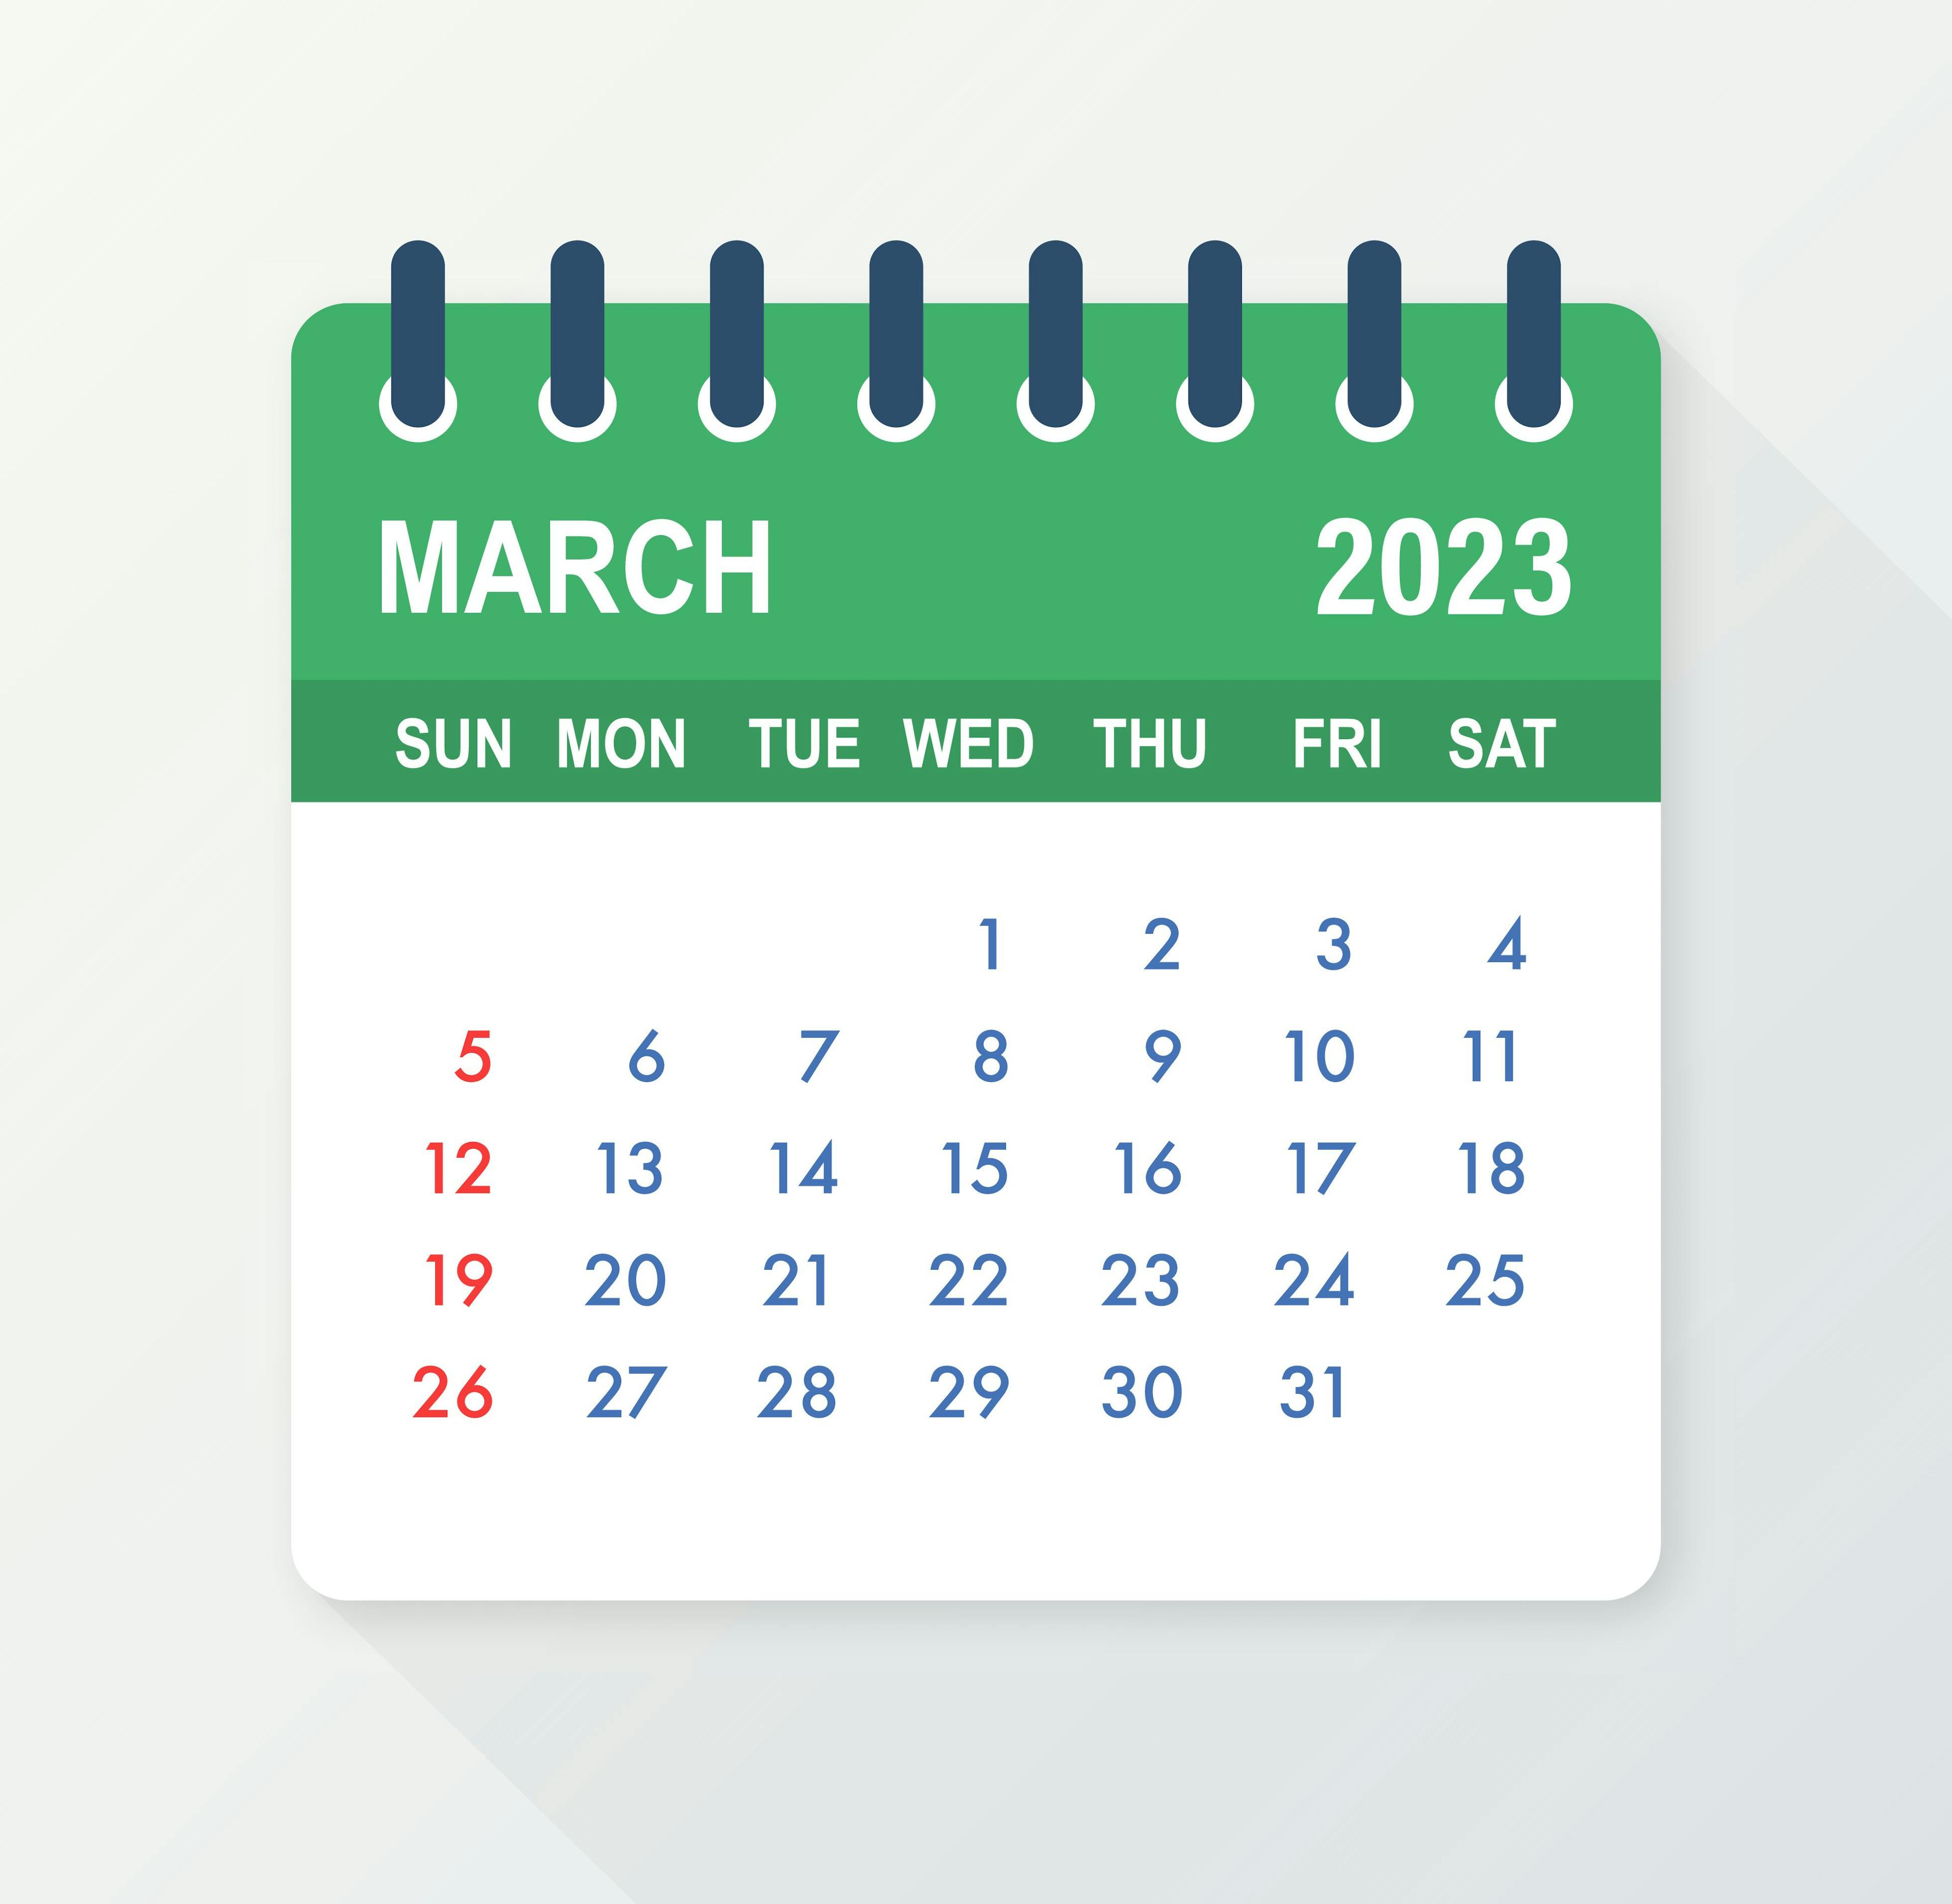 Rheumatology Month in Review: March 2023